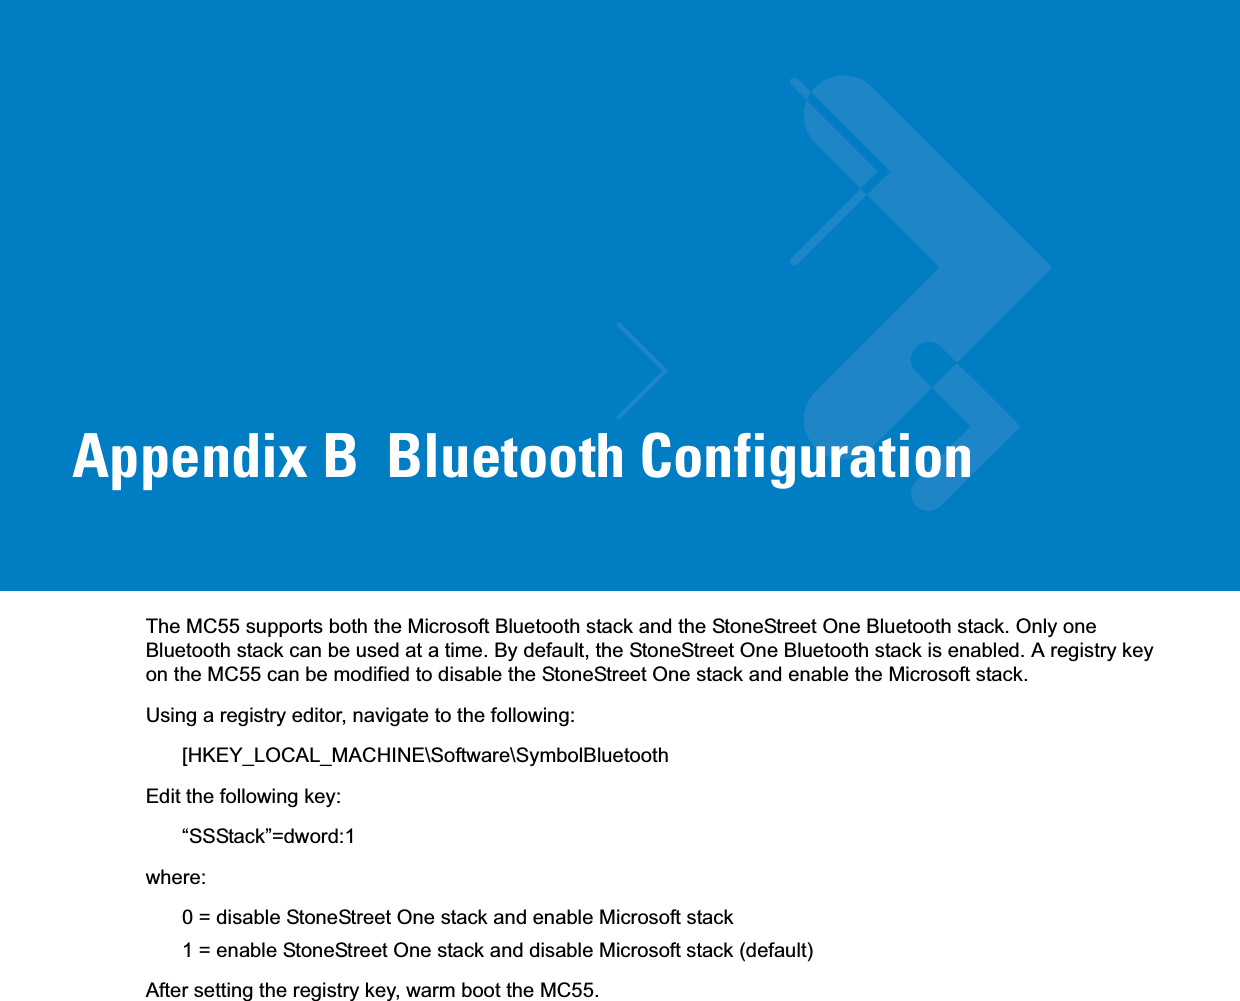 Appendix B  Bluetooth ConfigurationThe MC55 supports both the Microsoft Bluetooth stack and the StoneStreet One Bluetooth stack. Only one Bluetooth stack can be used at a time. By default, the StoneStreet One Bluetooth stack is enabled. A registry key on the MC55 can be modified to disable the StoneStreet One stack and enable the Microsoft stack.Using a registry editor, navigate to the following:[HKEY_LOCAL_MACHINE\Software\SymbolBluetoothEdit the following key:“SSStack”=dword:1where:0 = disable StoneStreet One stack and enable Microsoft stack1 = enable StoneStreet One stack and disable Microsoft stack (default) After setting the registry key, warm boot the MC55.